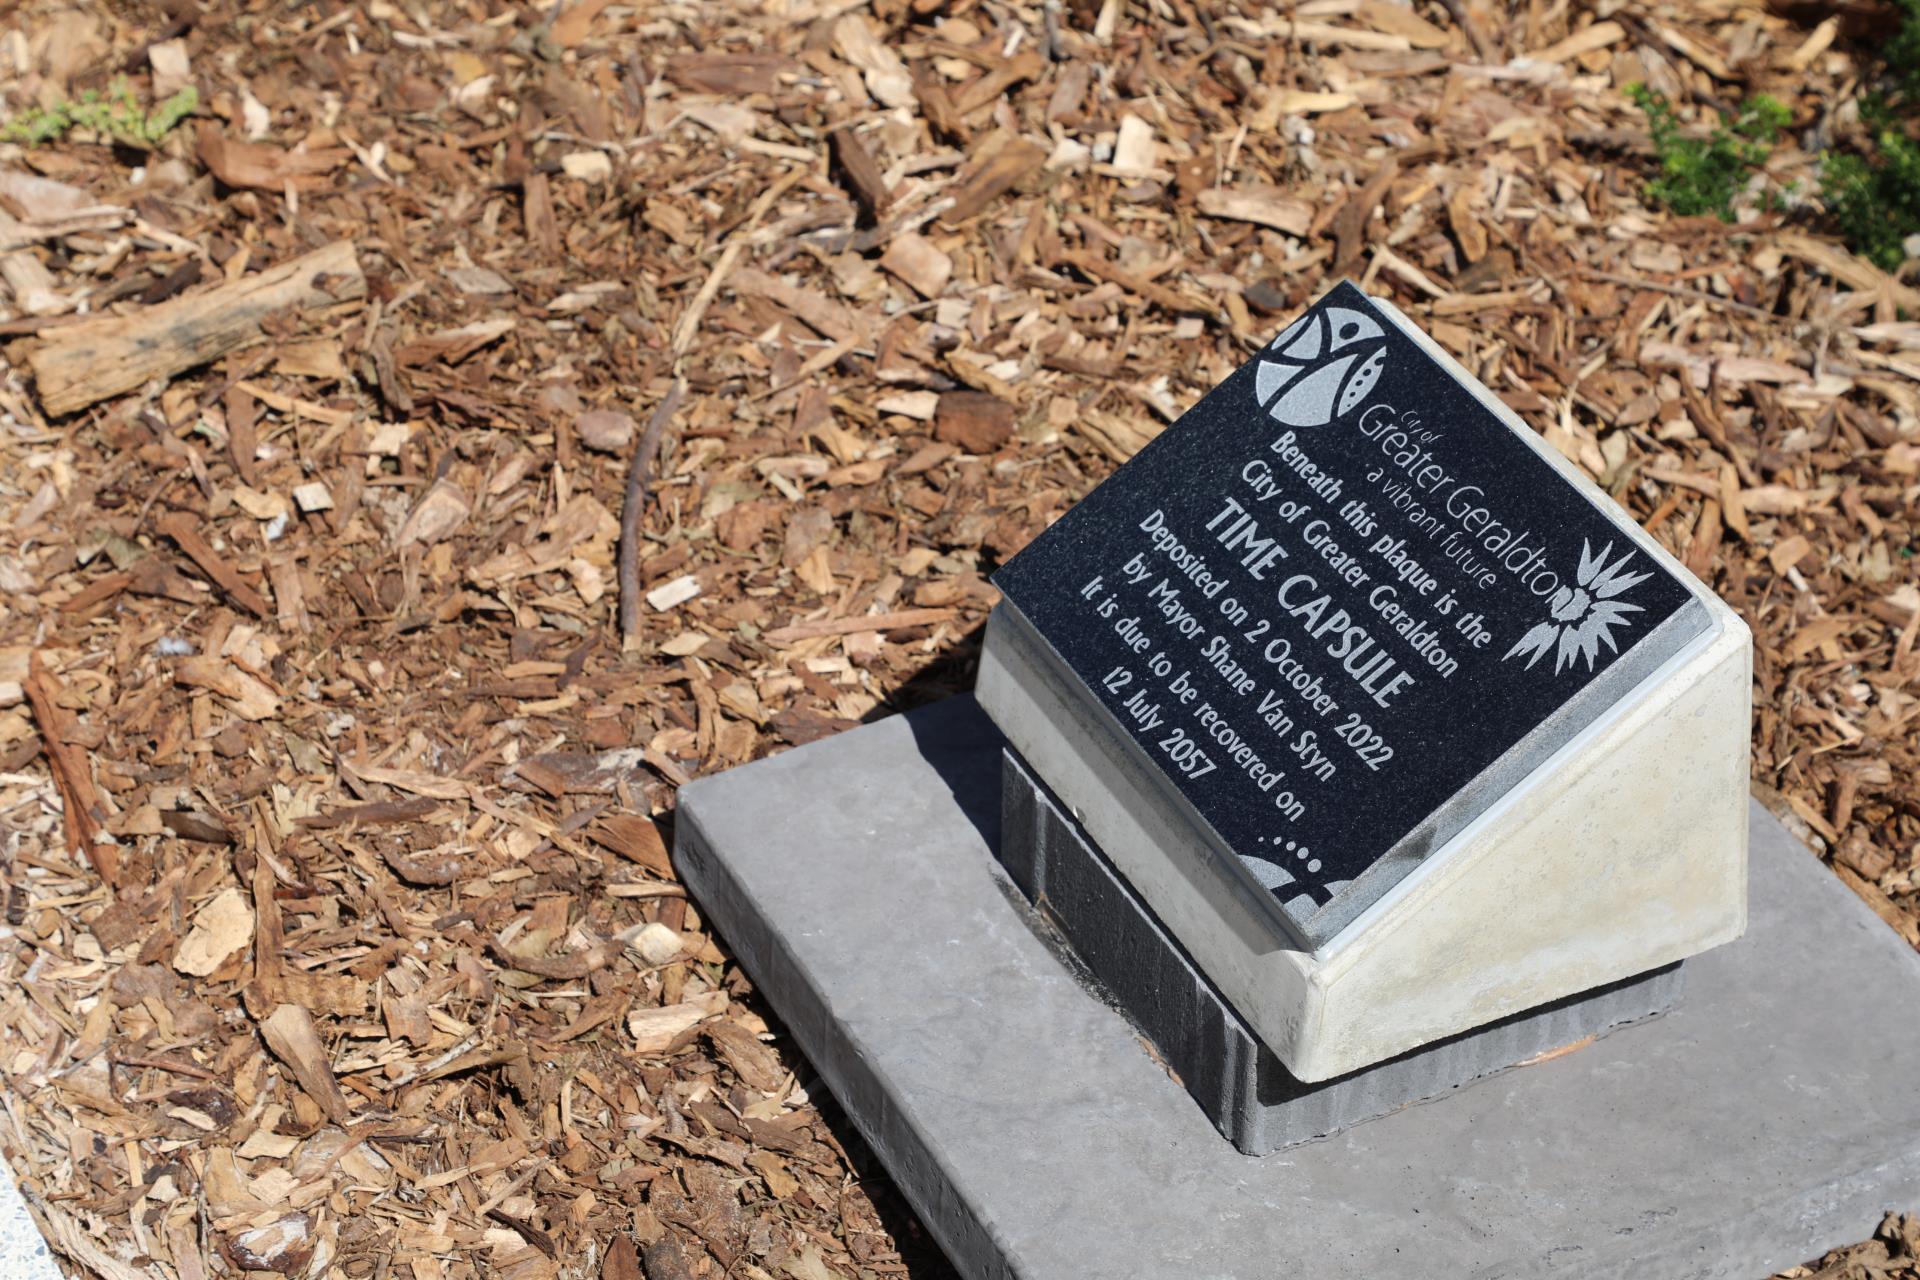 Time capsule buried in transformed park